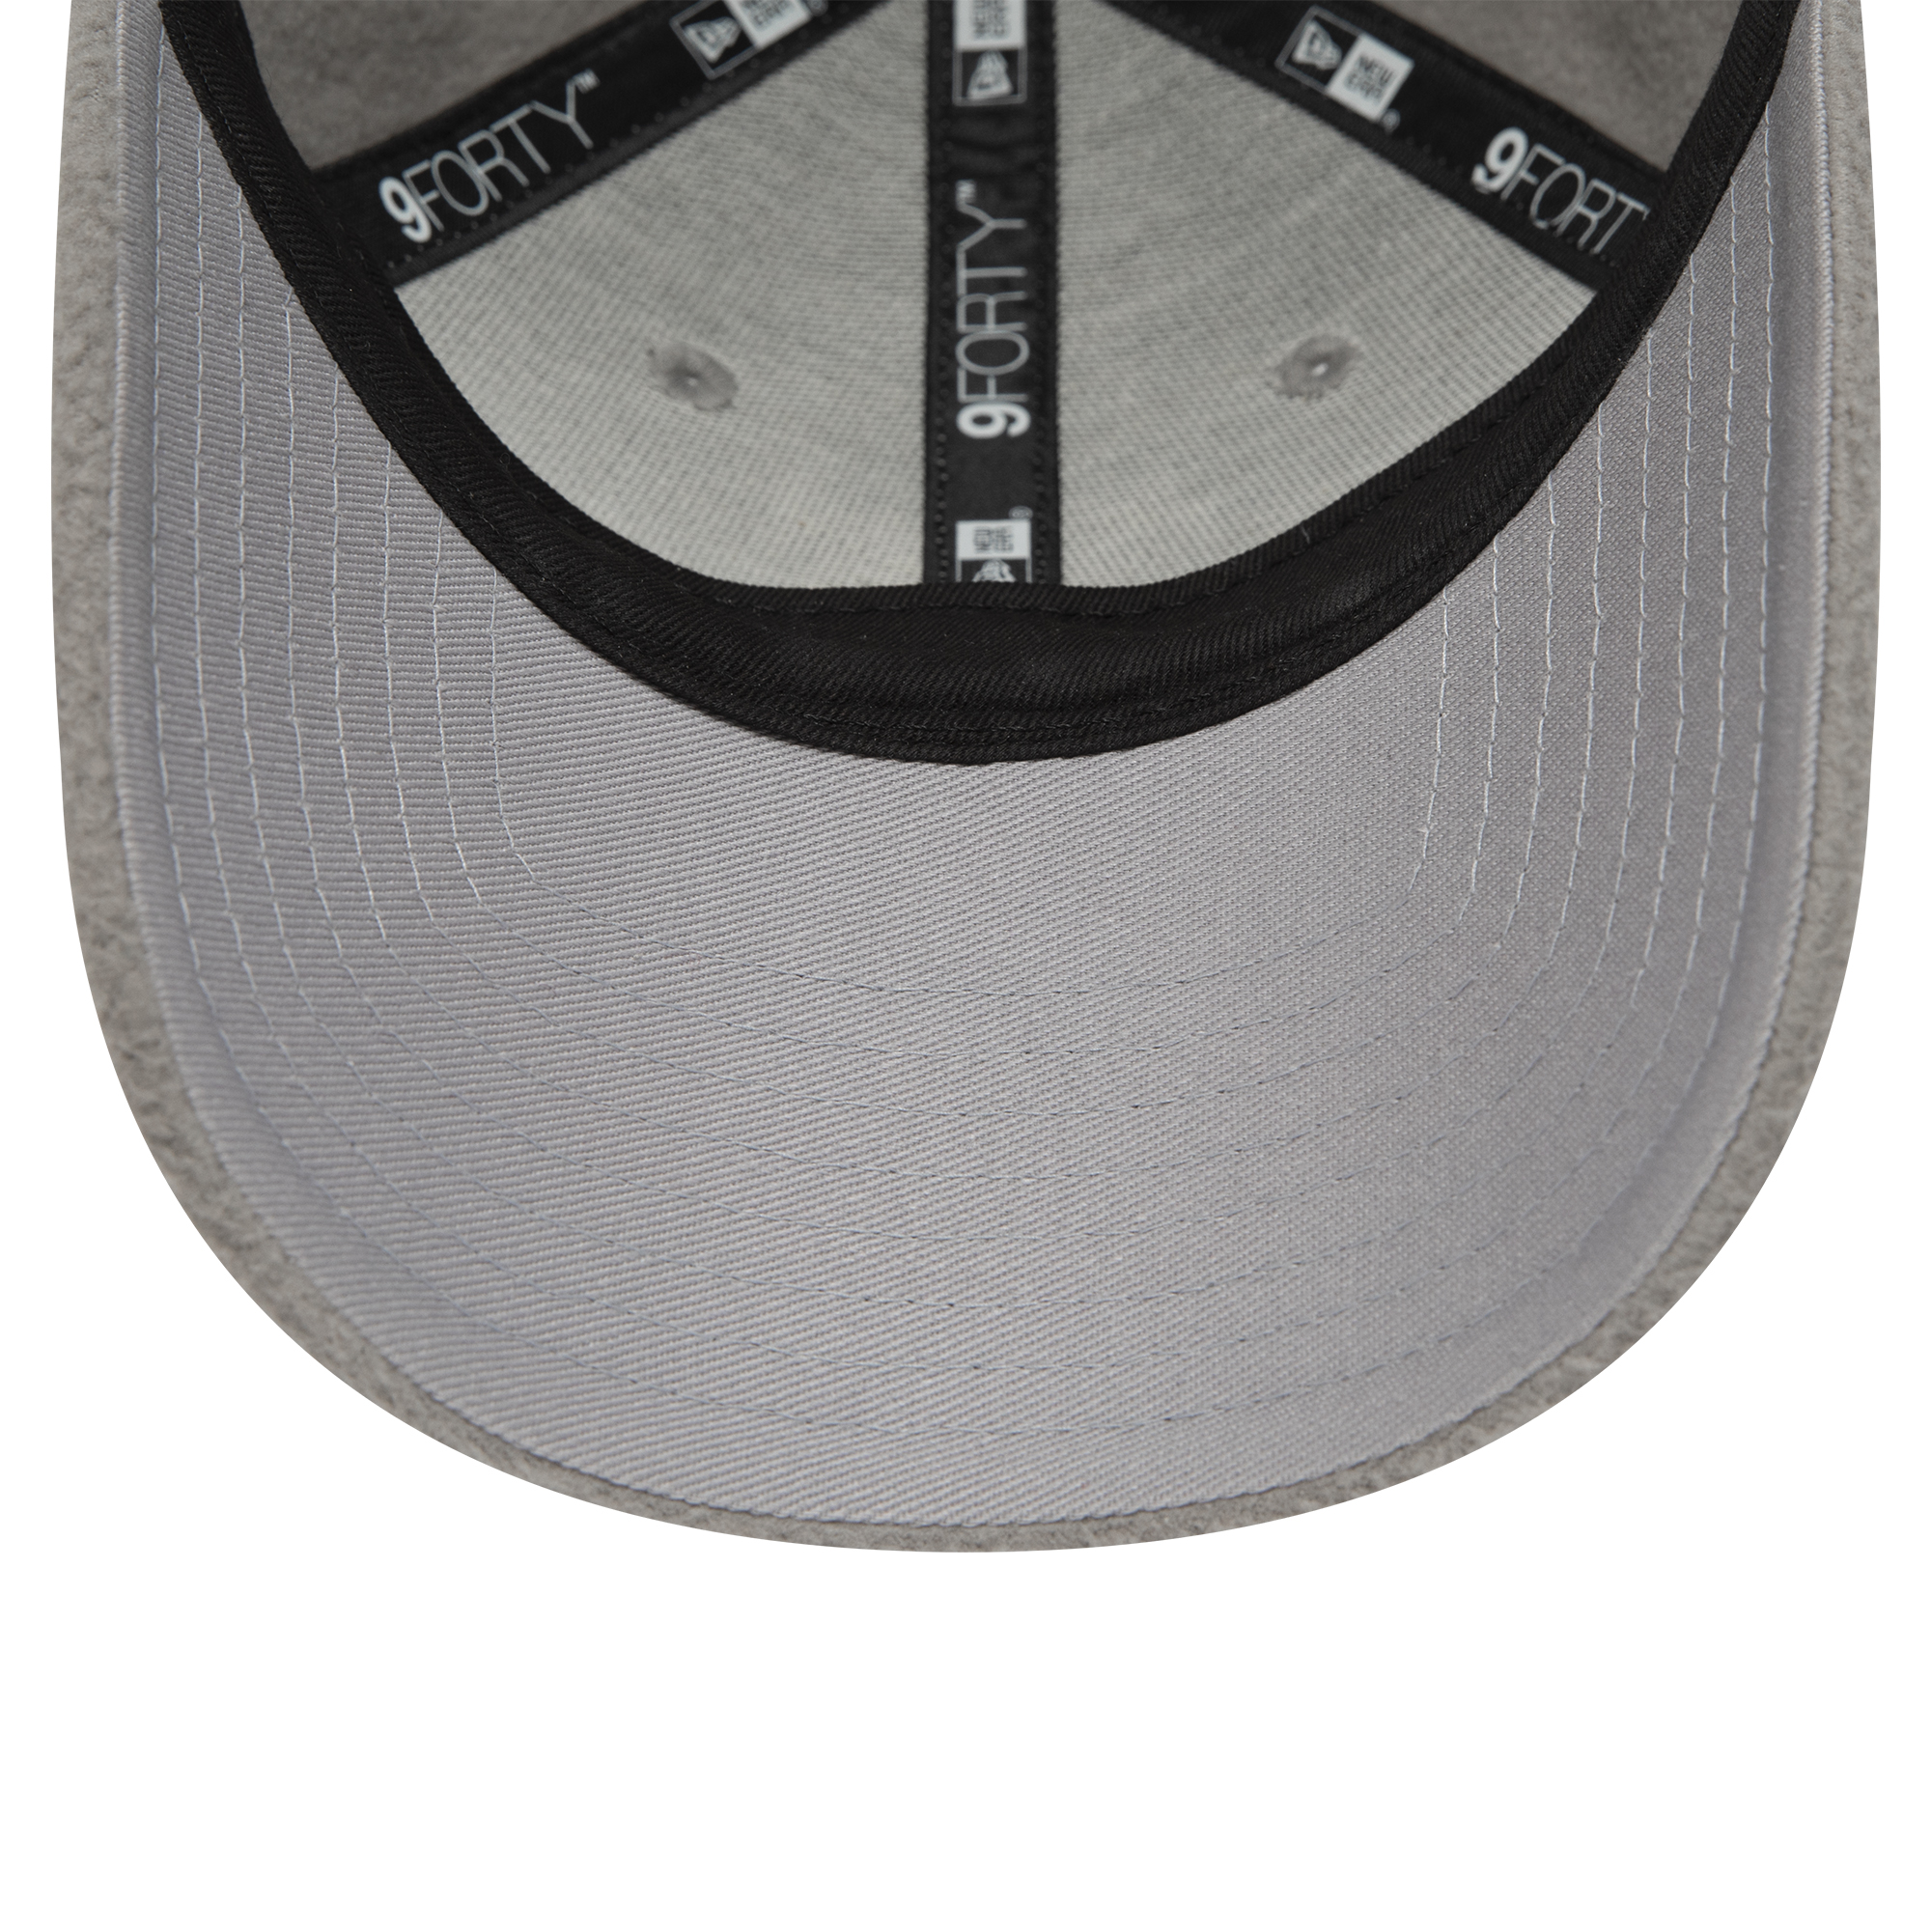 Manchester United Womens Borg Grey 9FORTY Adjustable Cap